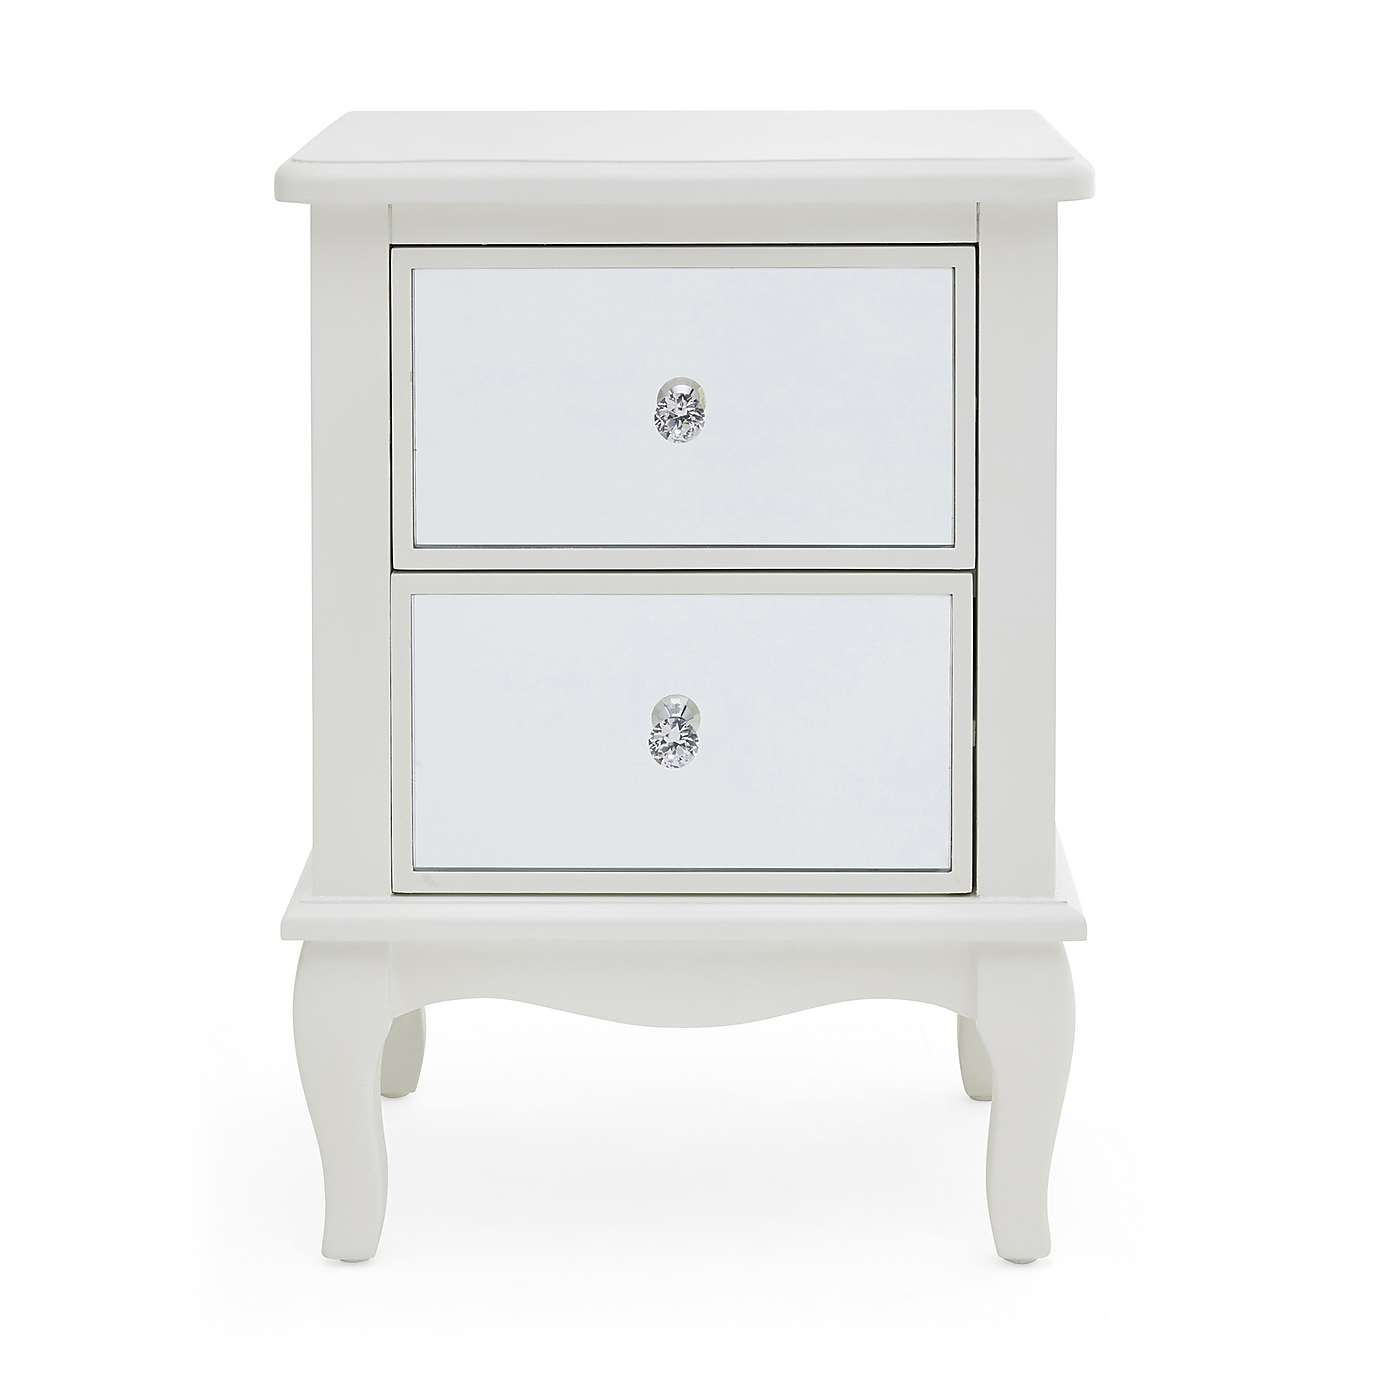 Maison Mirrored IvoAmra 2 Drawer Bedside Table - Image 2 of 2